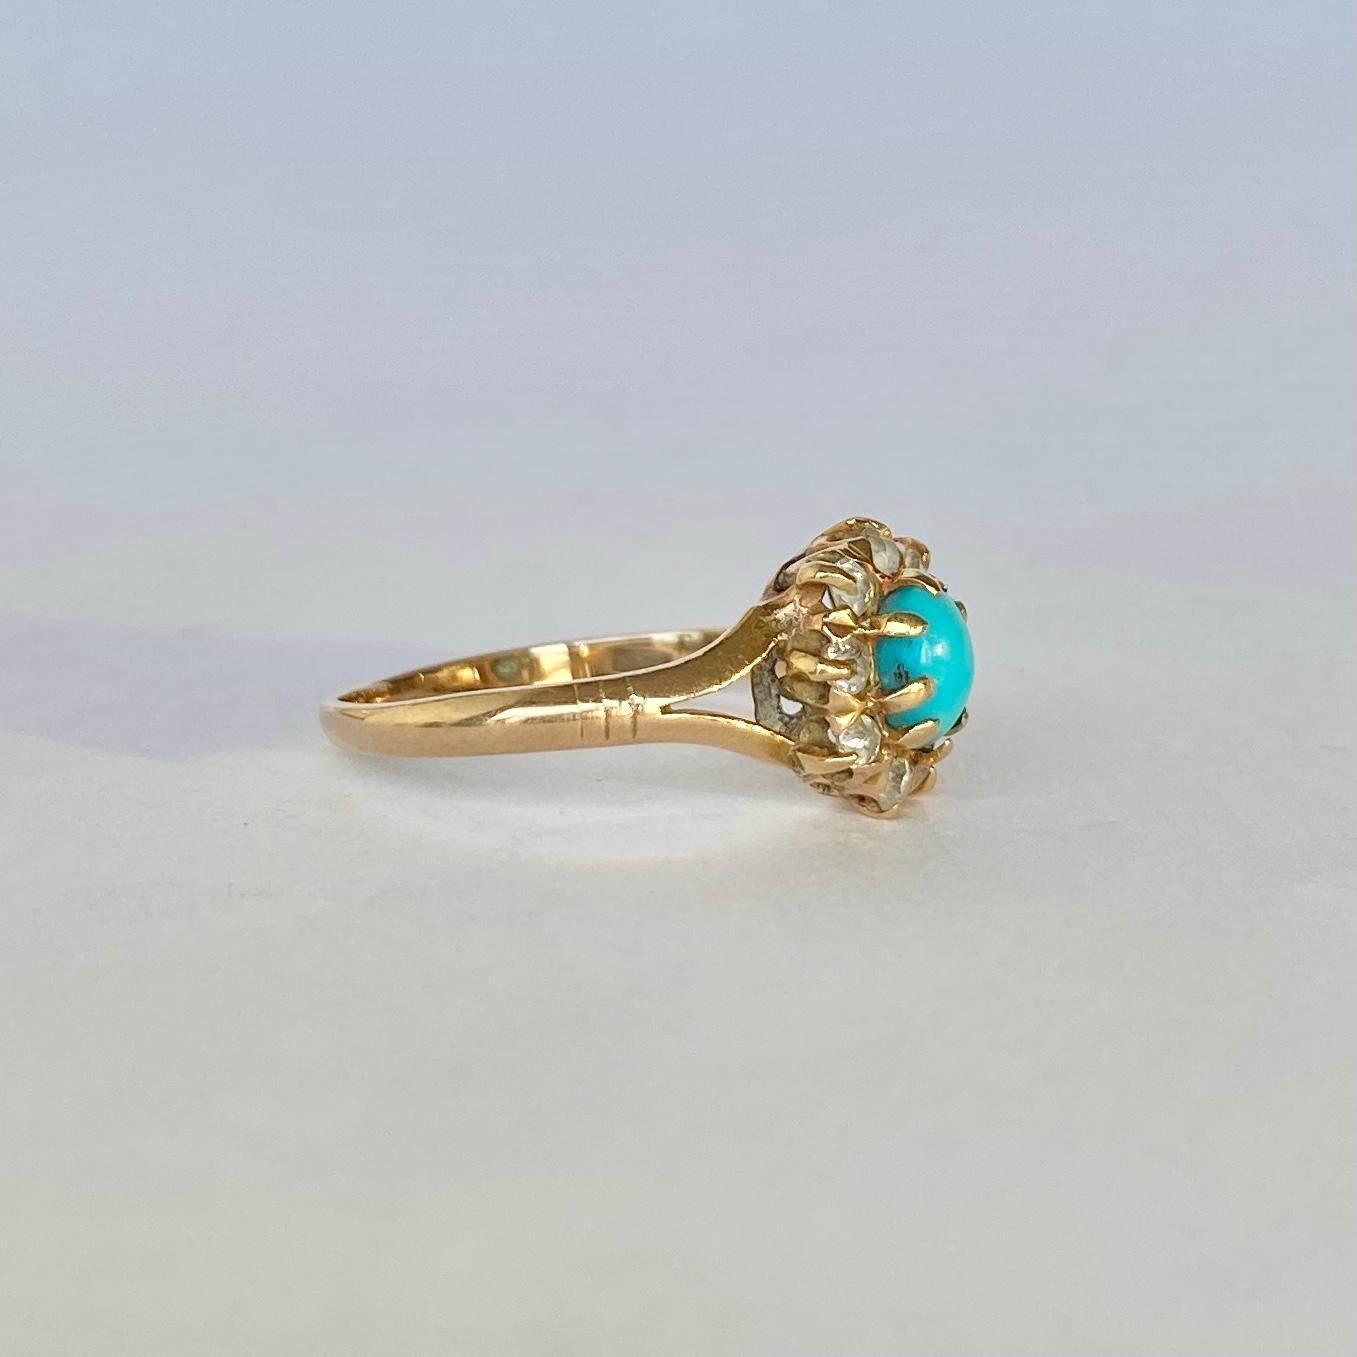 This sweet turquoise and diamond cluster ring holds a total of 20pts of diamond. The ring is modelled in 15carat gold and has split shoulder detail. 

Ring Size: M 1/2 or 6 1/2
Cluster Dimensions: 9x8mm

Weight: 1.8g